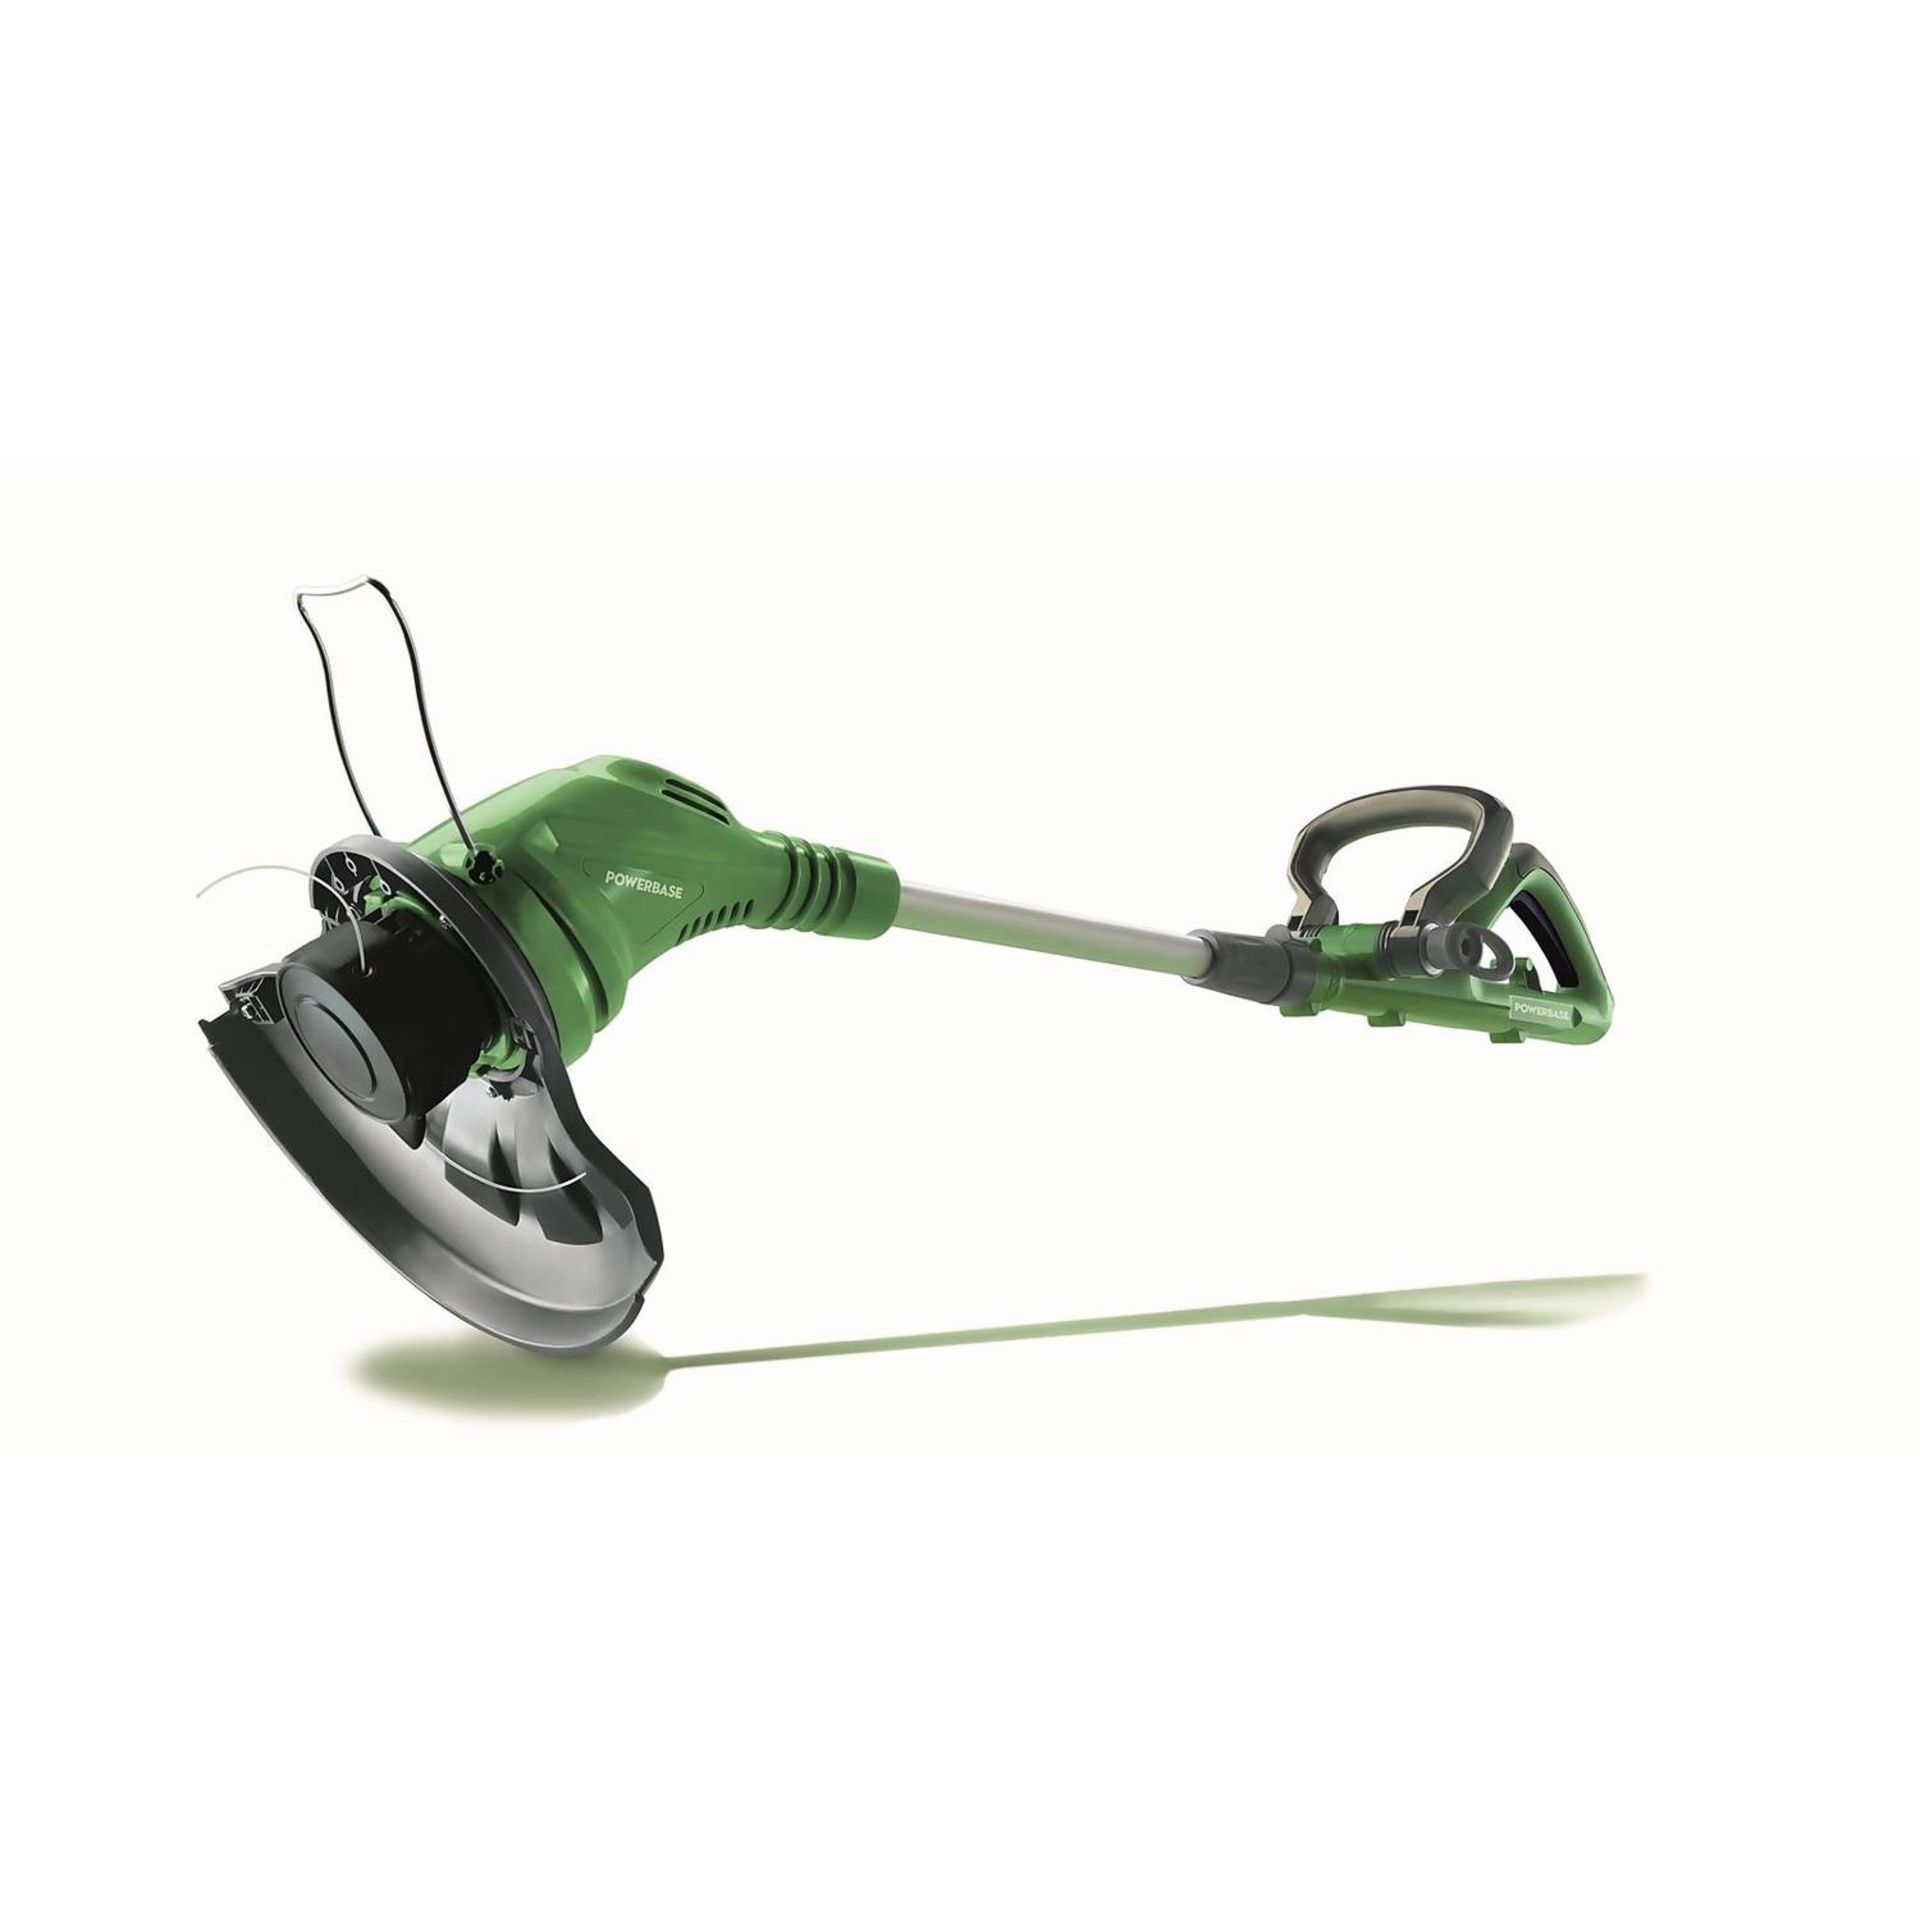 (R15A) 2x Powerbase Electric Grass Trimmer 450W. (Both Items Clean. Appears As New).